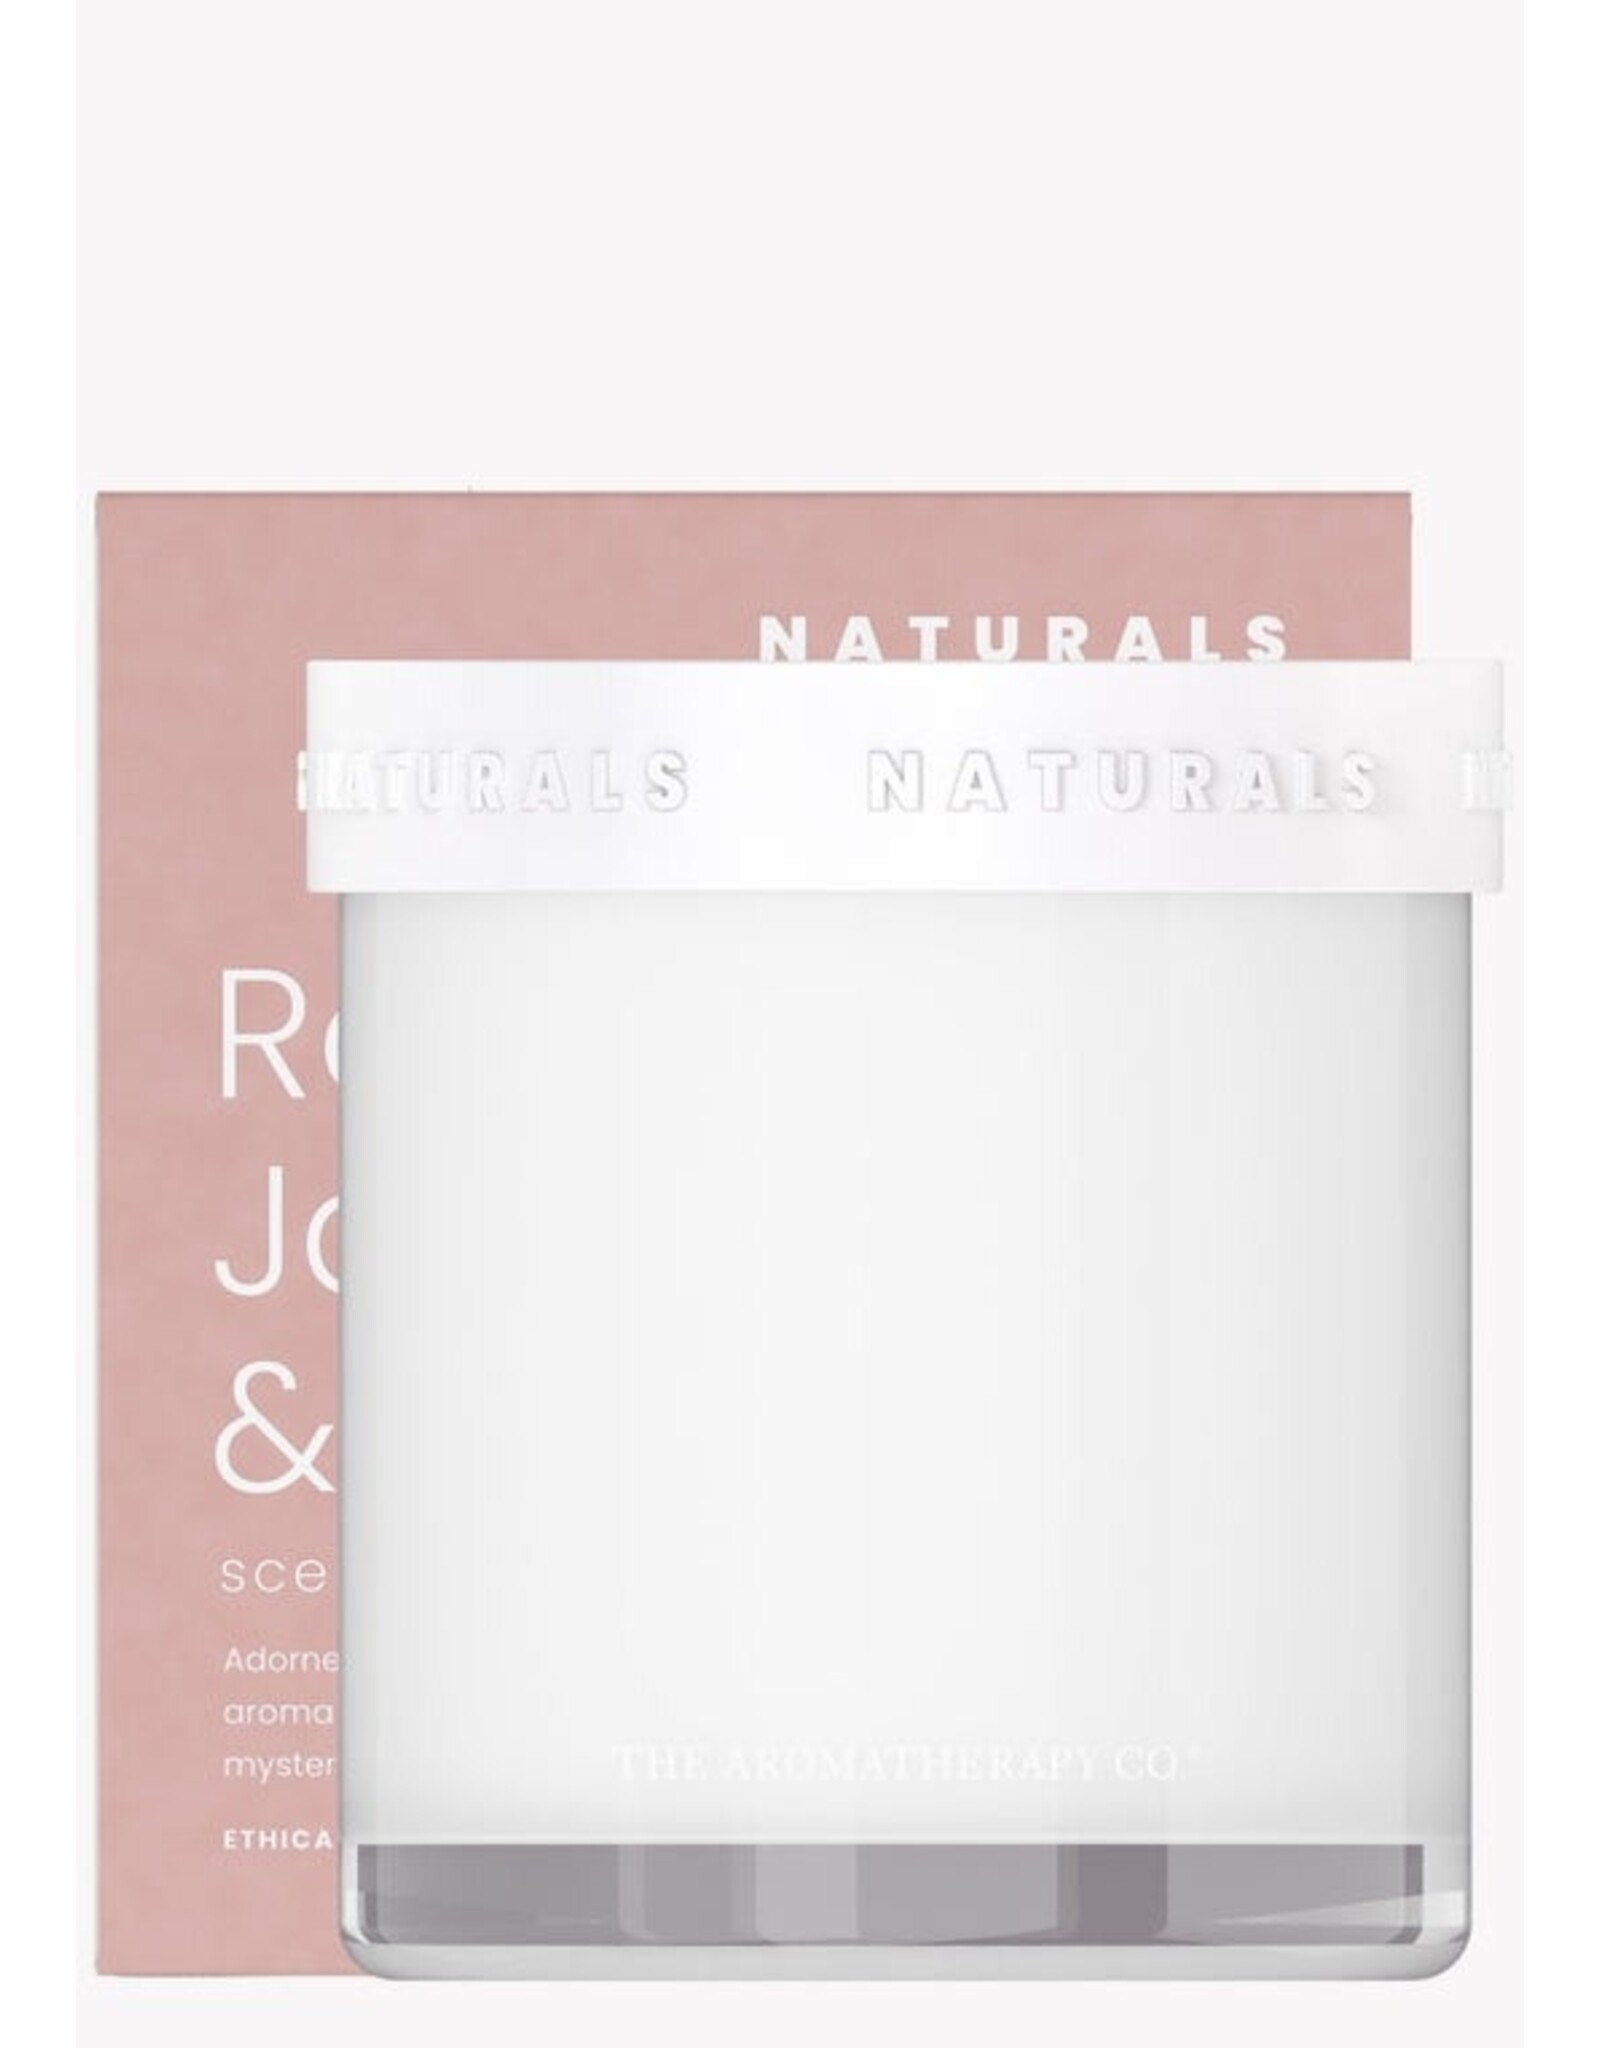 The Aromatherapy Co Naturals Candle 400g